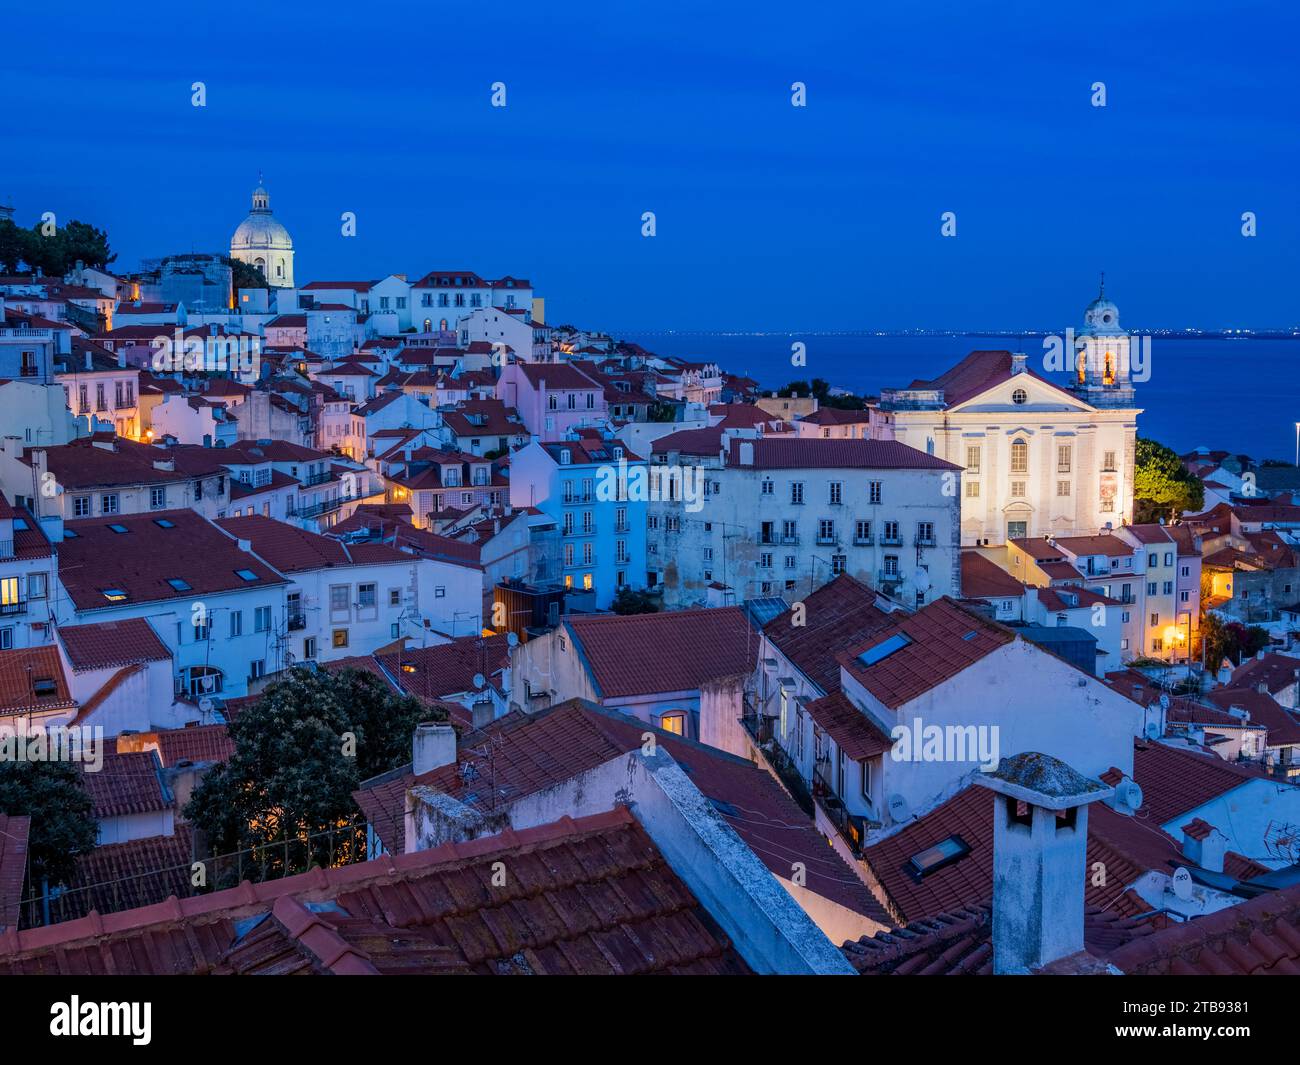 Santo Estevao church and the National Pantheon in the old town Alfama district  lit up at night from the Portas do Sol Viewpoint  in Lisbon Portugal Stock Photo